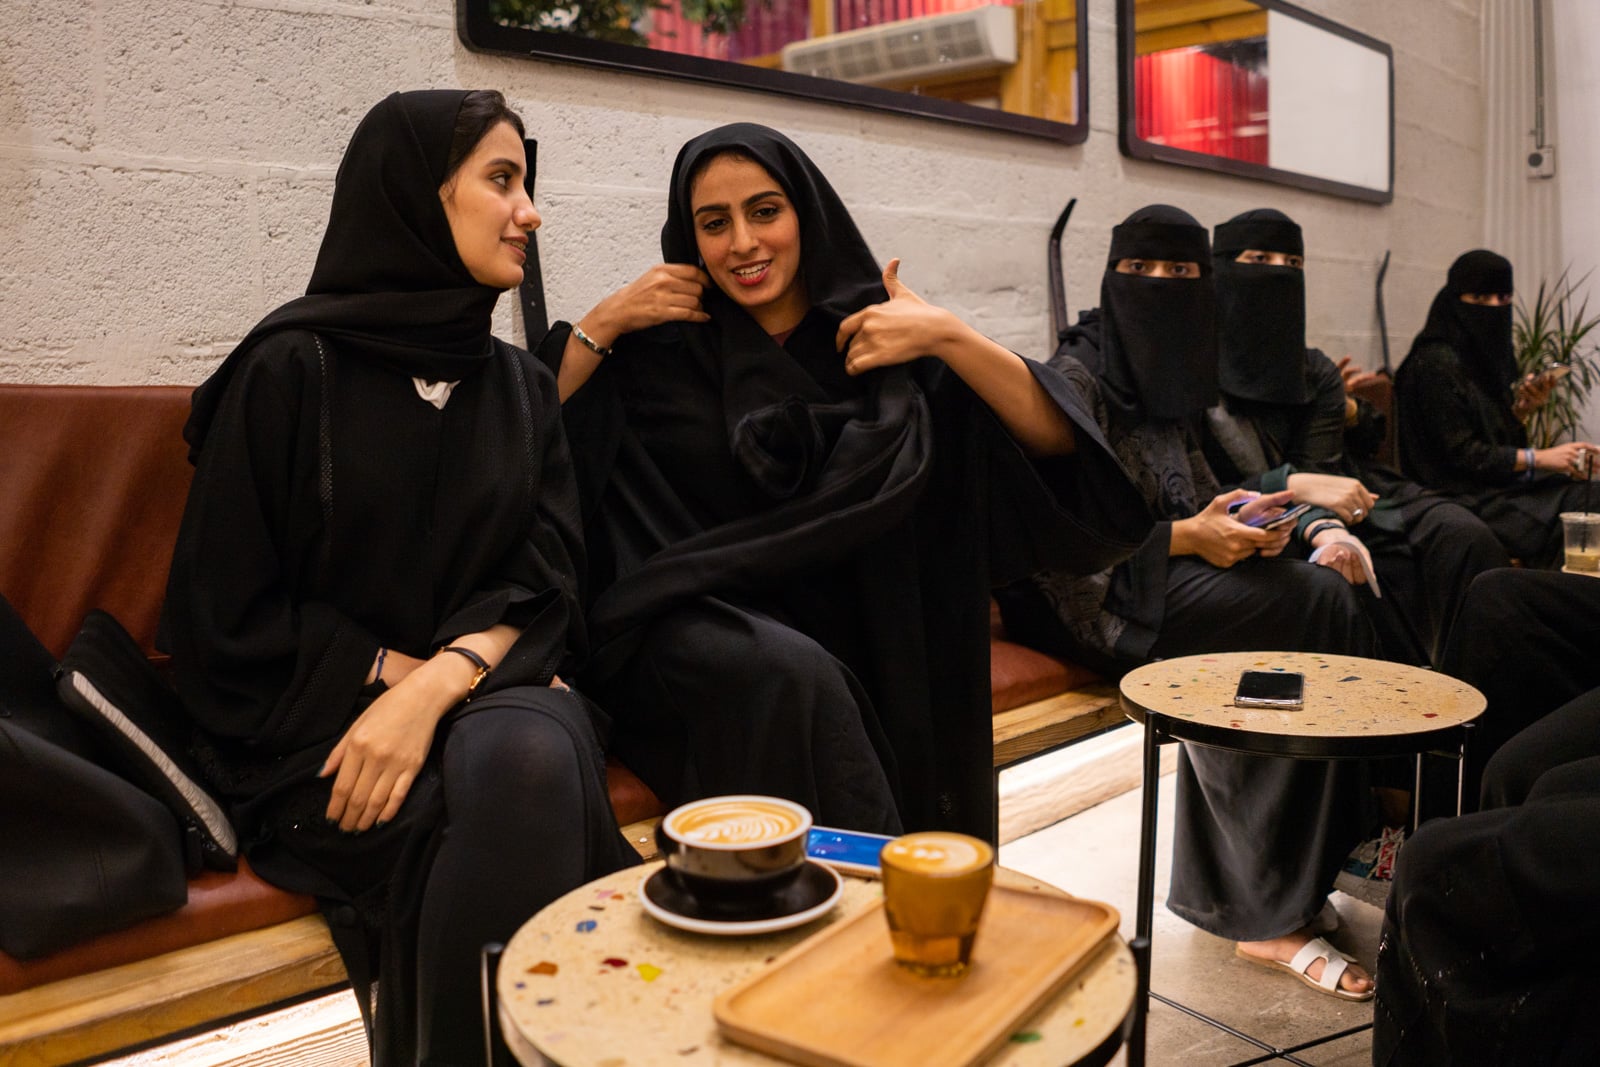 Young women in black sitting in the family section of a cafe in Jazan, Saudi Arabia